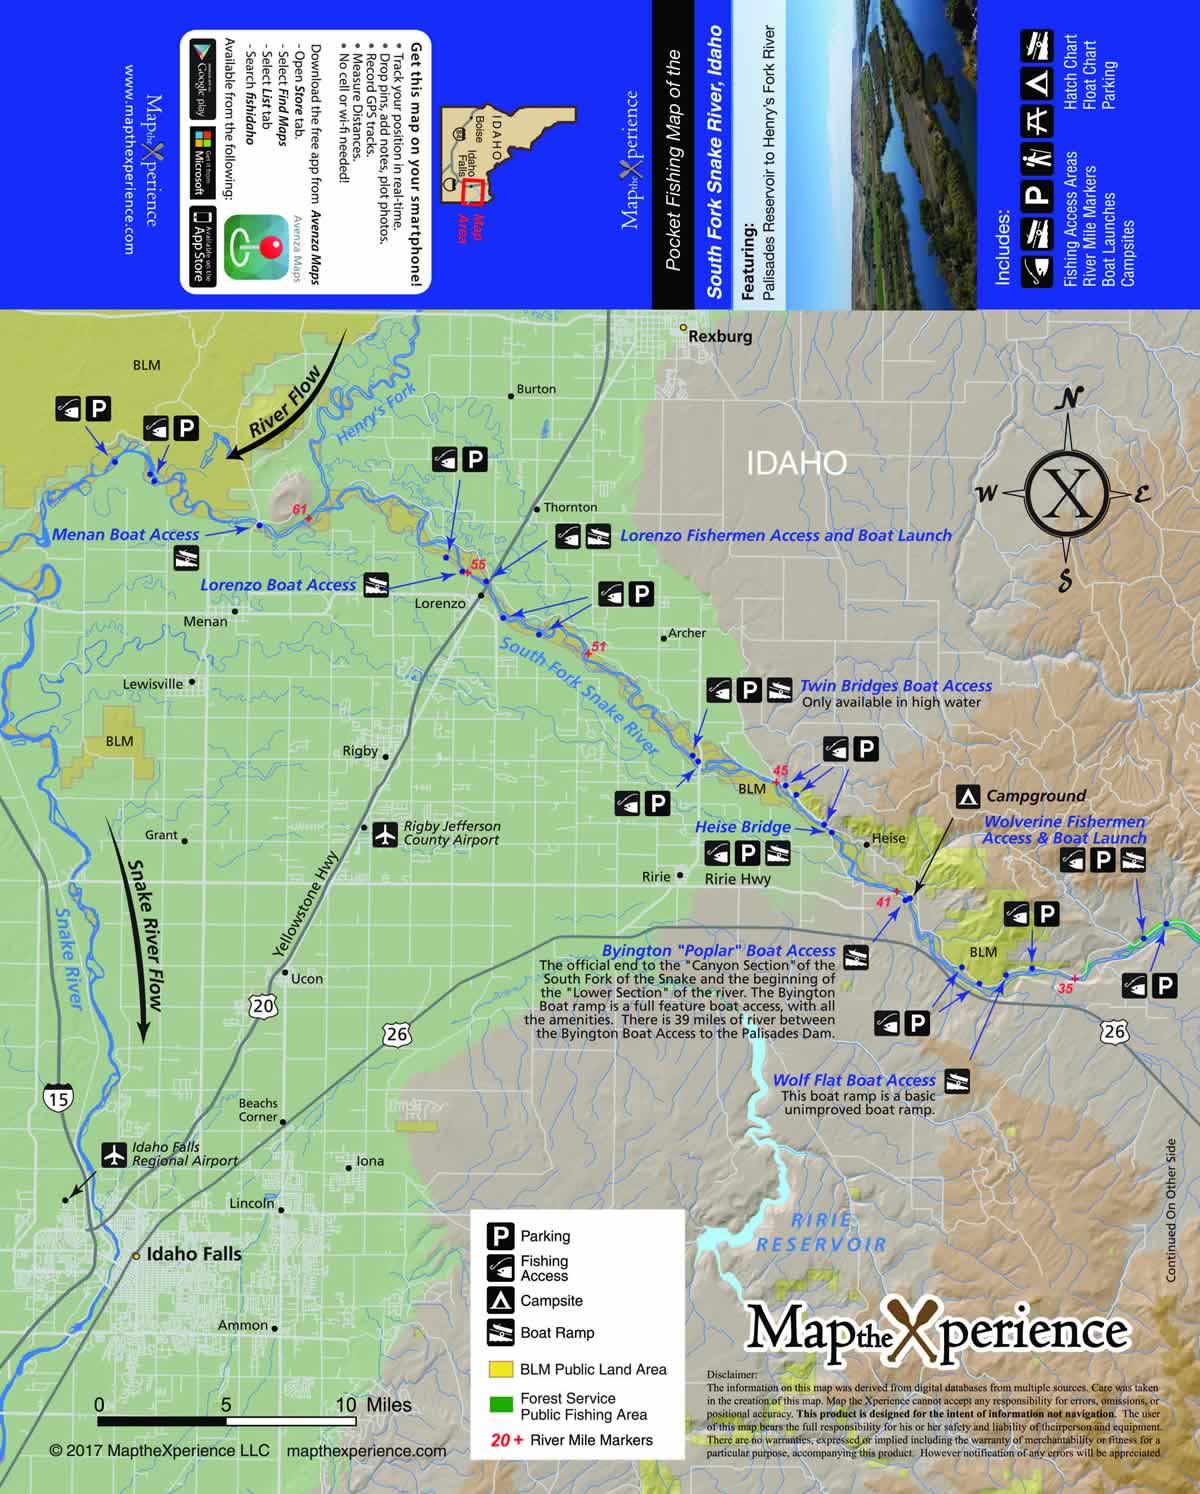 Map the Xperience - South Fork of Snake River (ID) Map